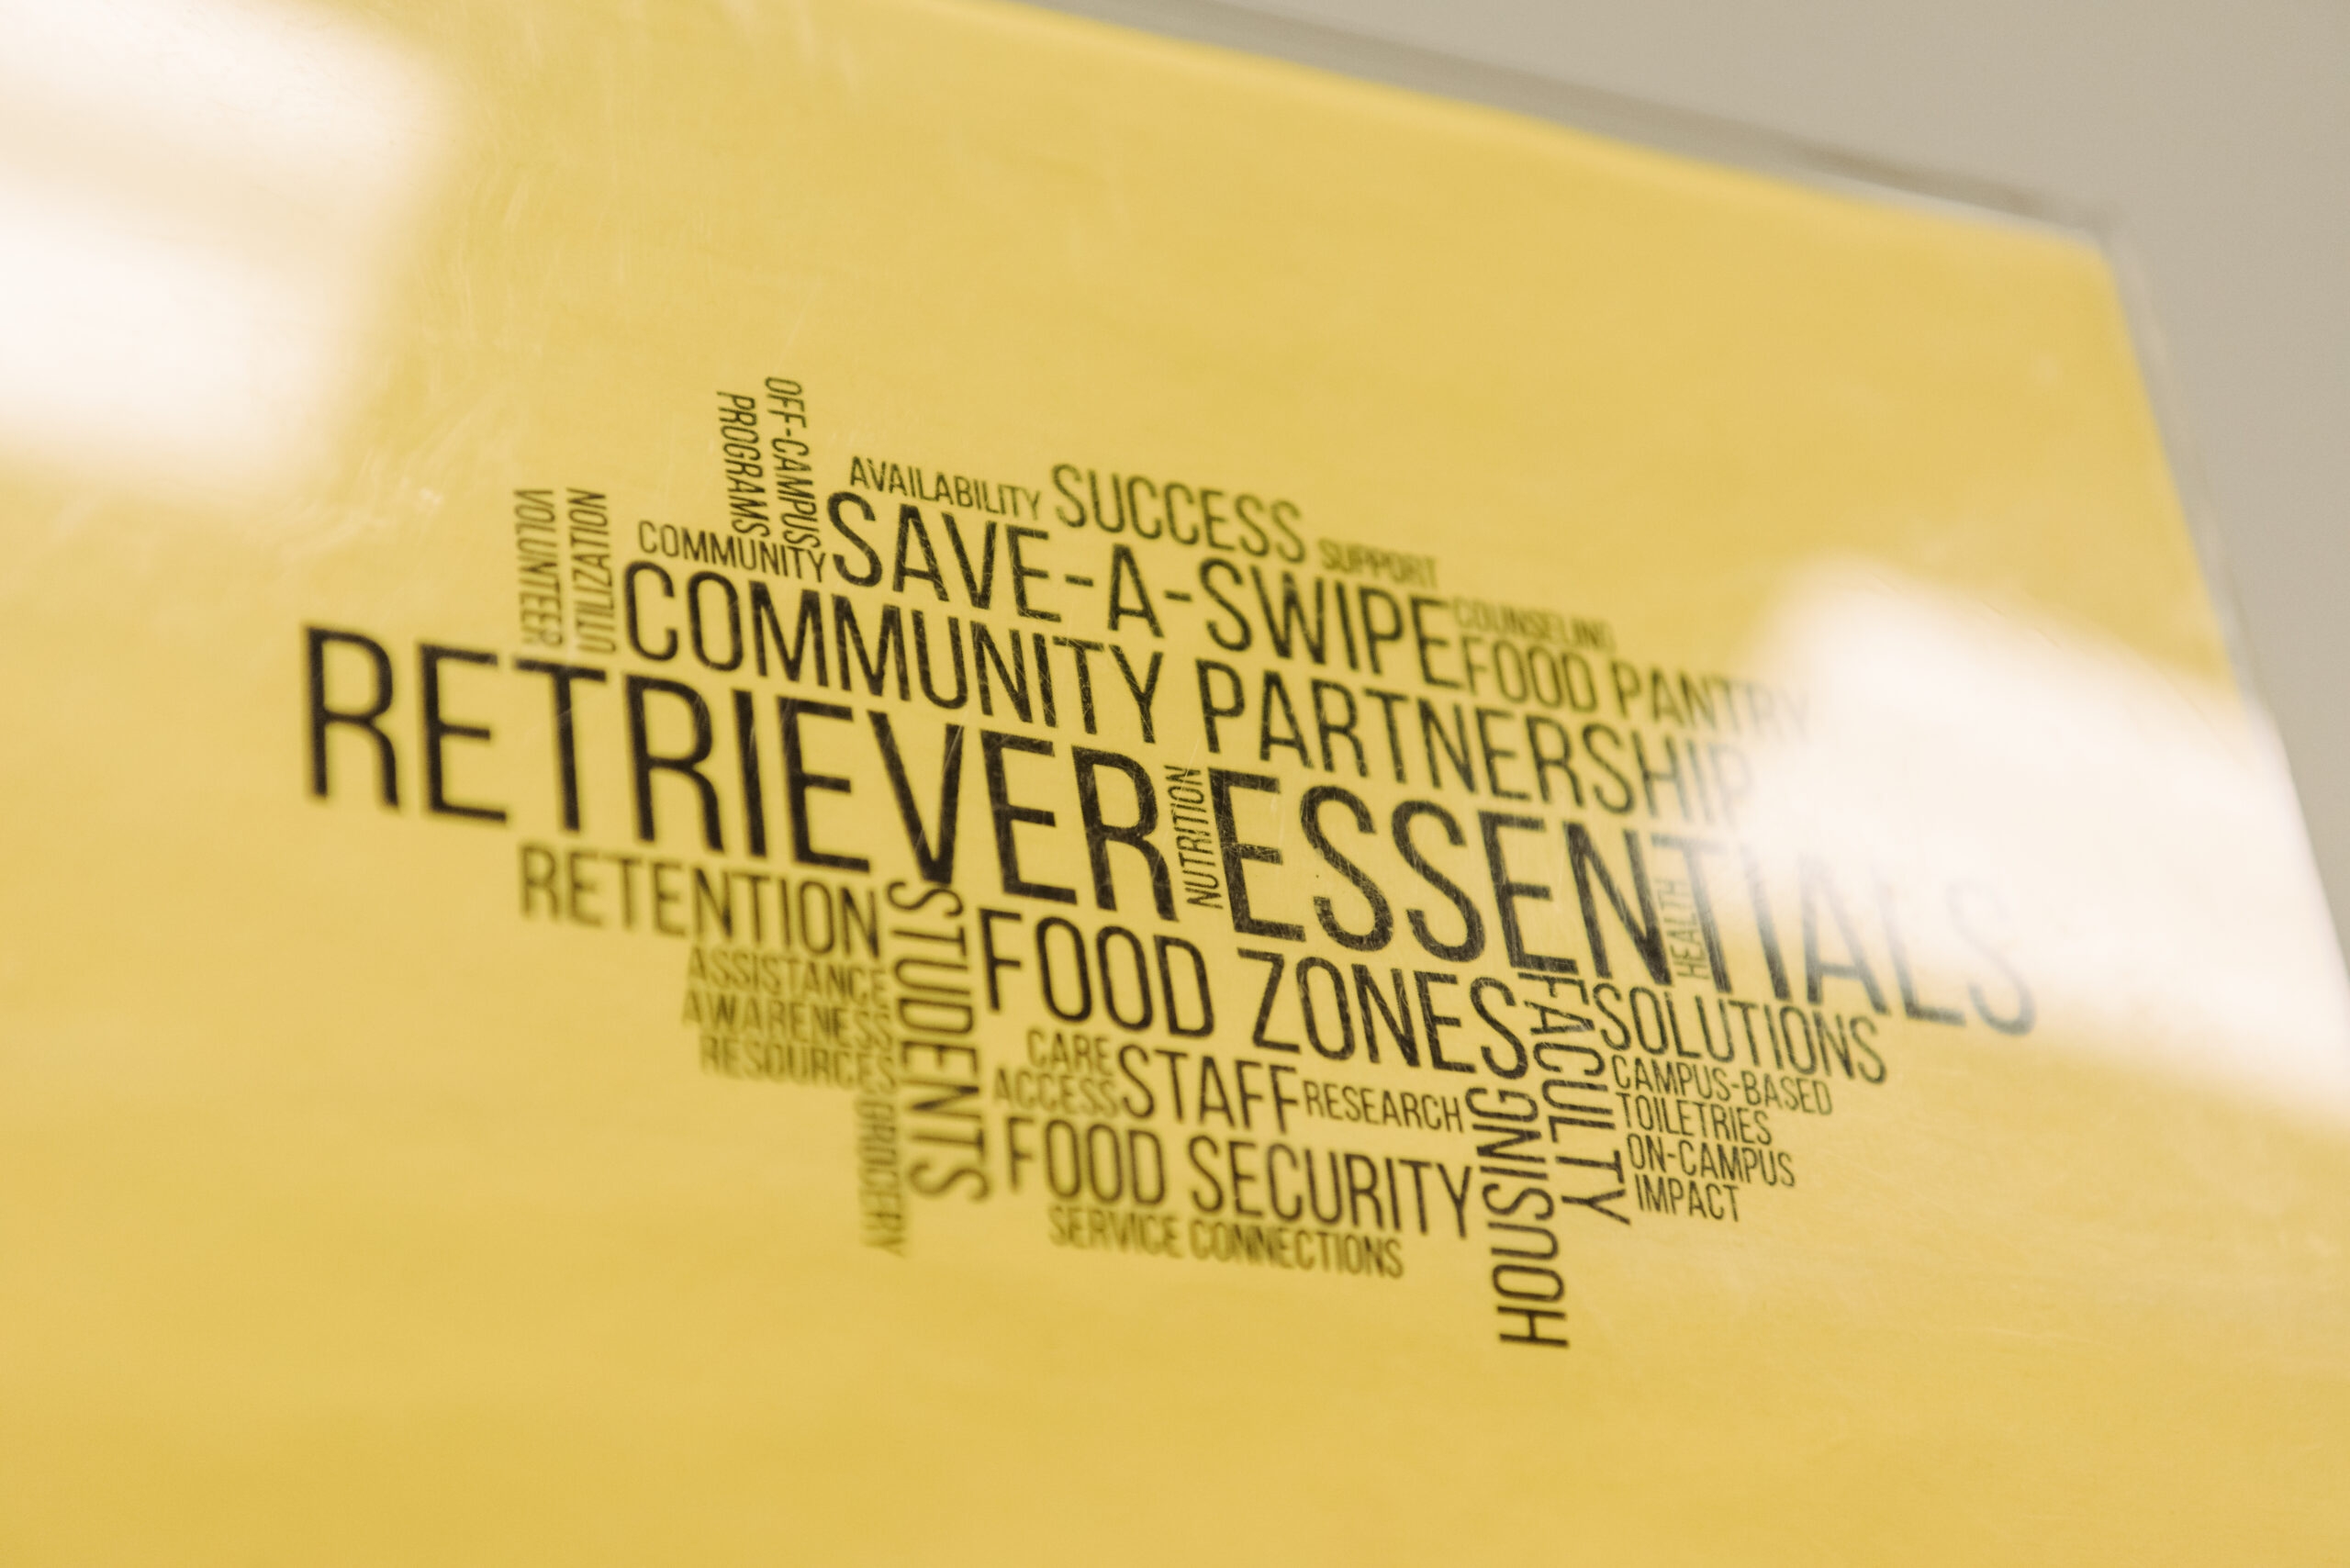 Printed text on yellow background as a word cloud, including words "Retriever Essentials. Community partnerships. Save-a-swipe"